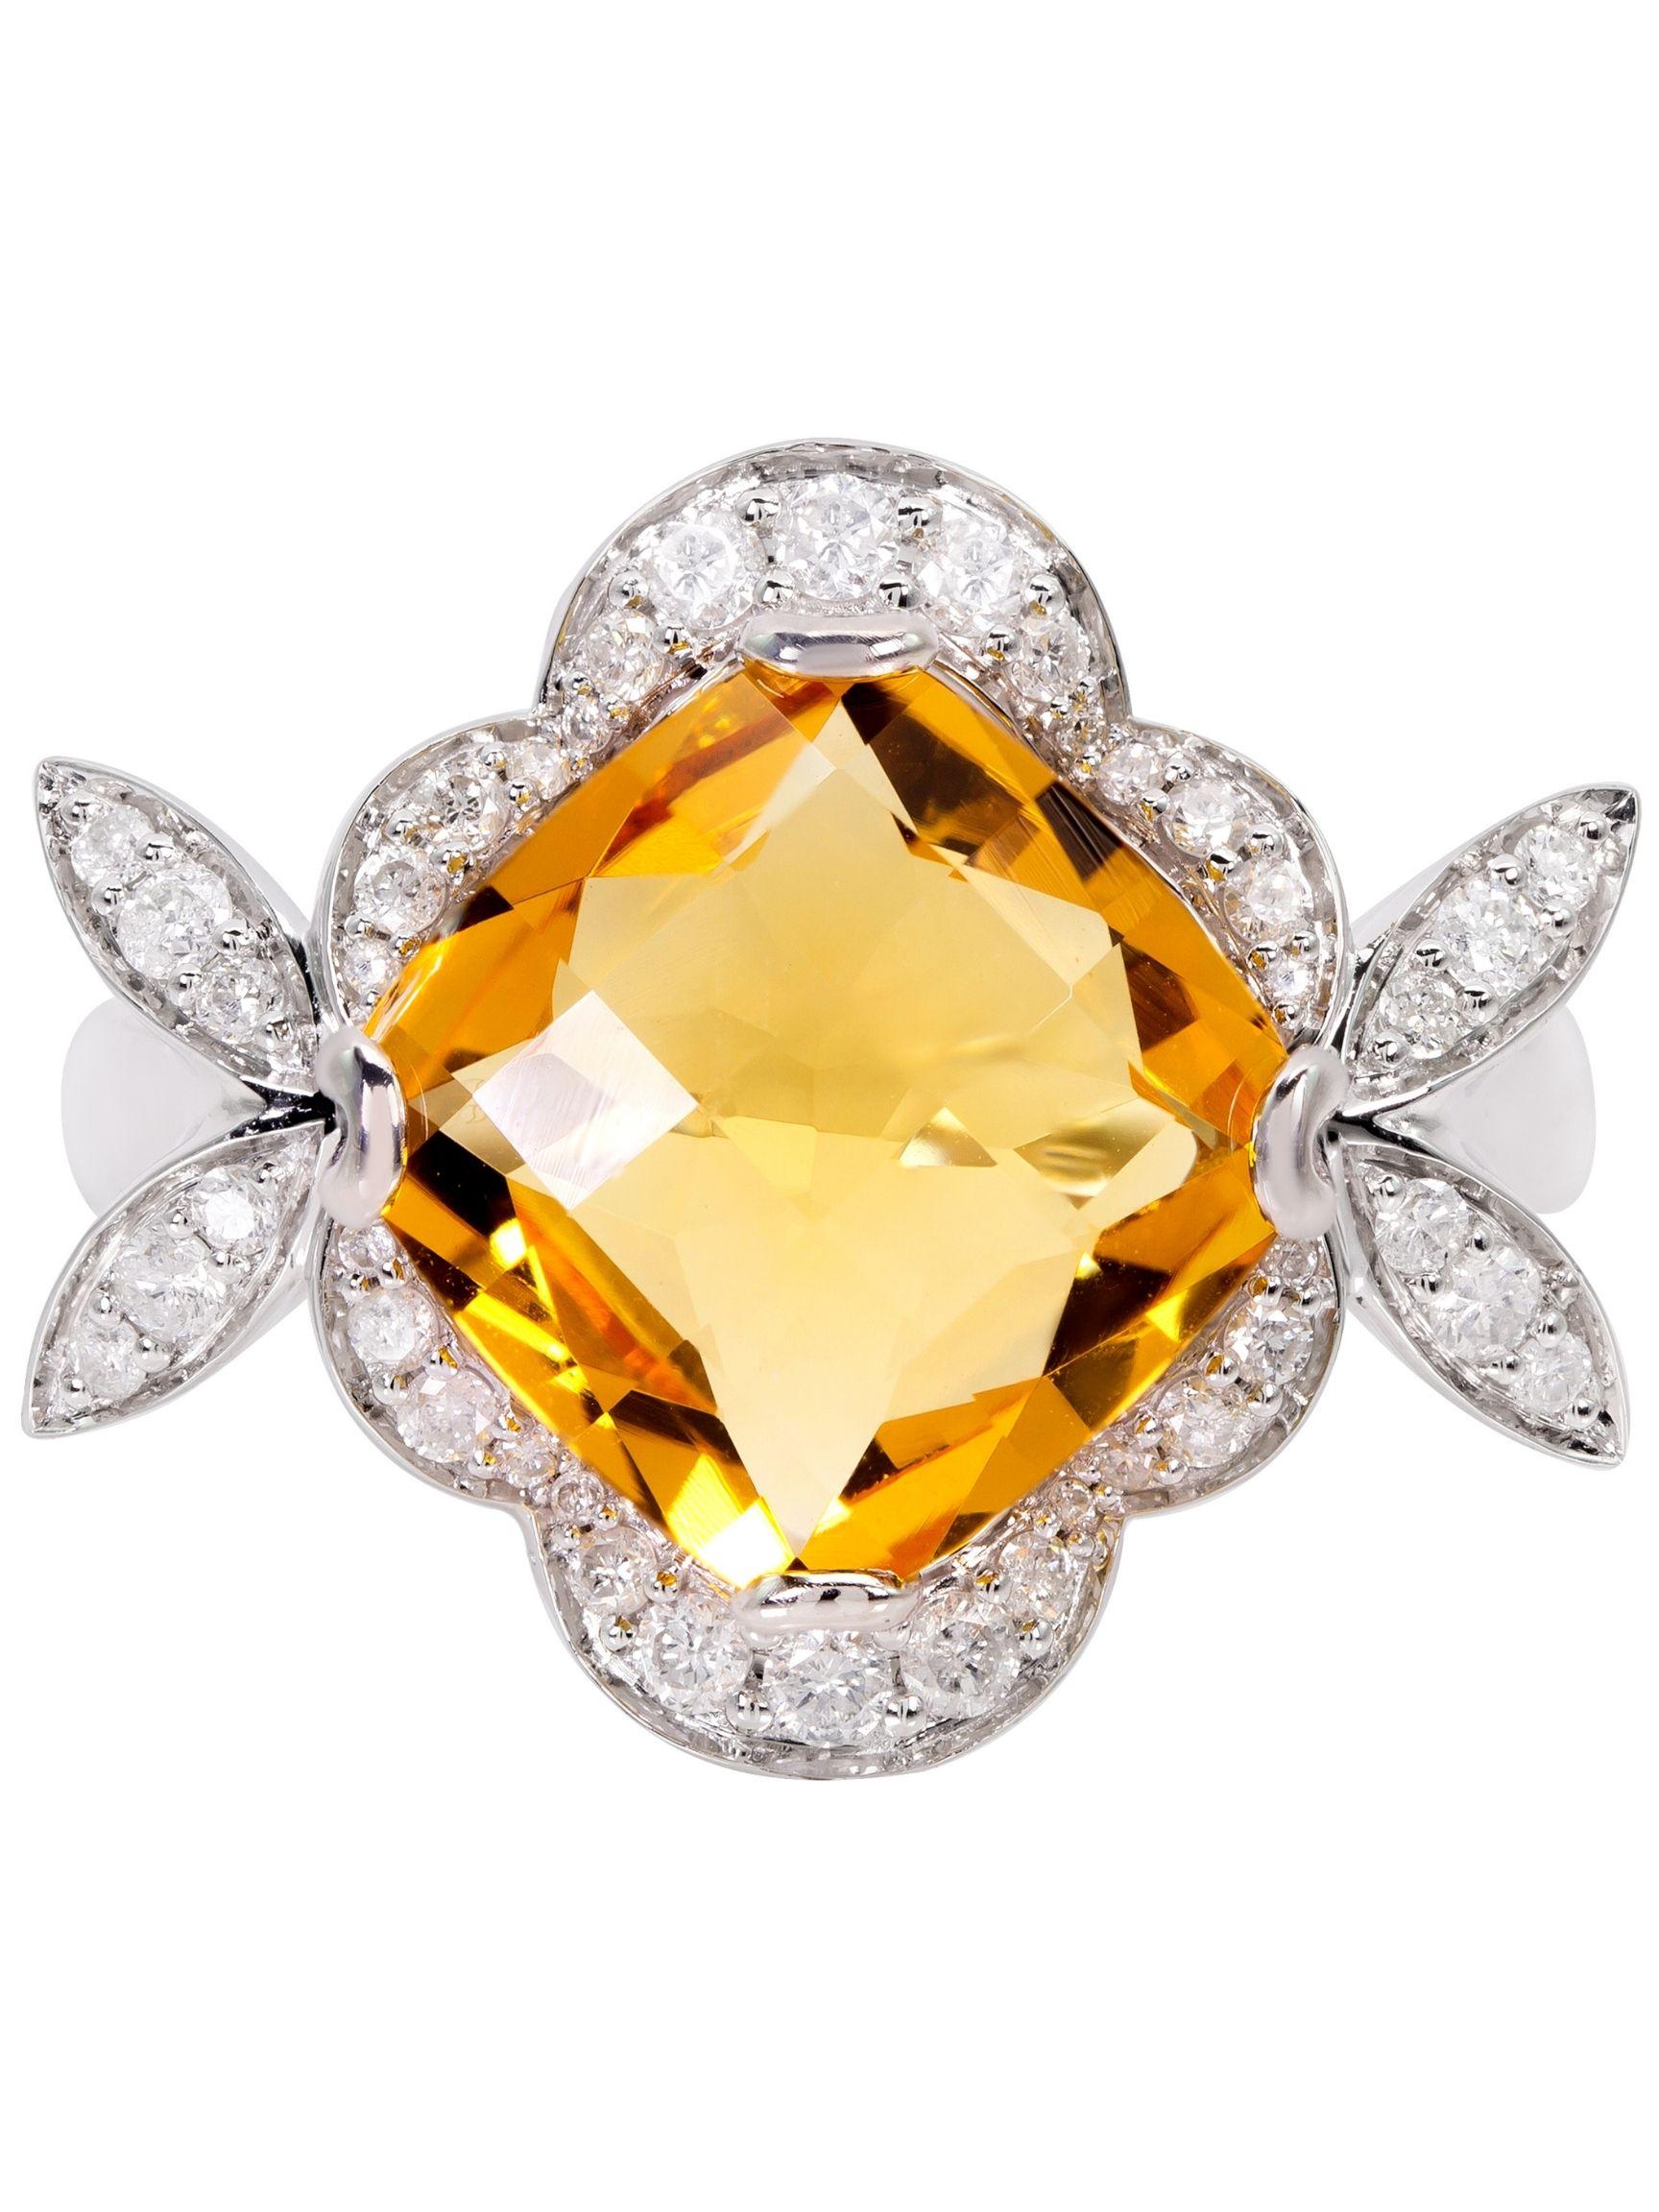 Cushion Cut Rhodium-Plated 3.3 Carat Citrine and Diamond Cocktail Ring For Sale